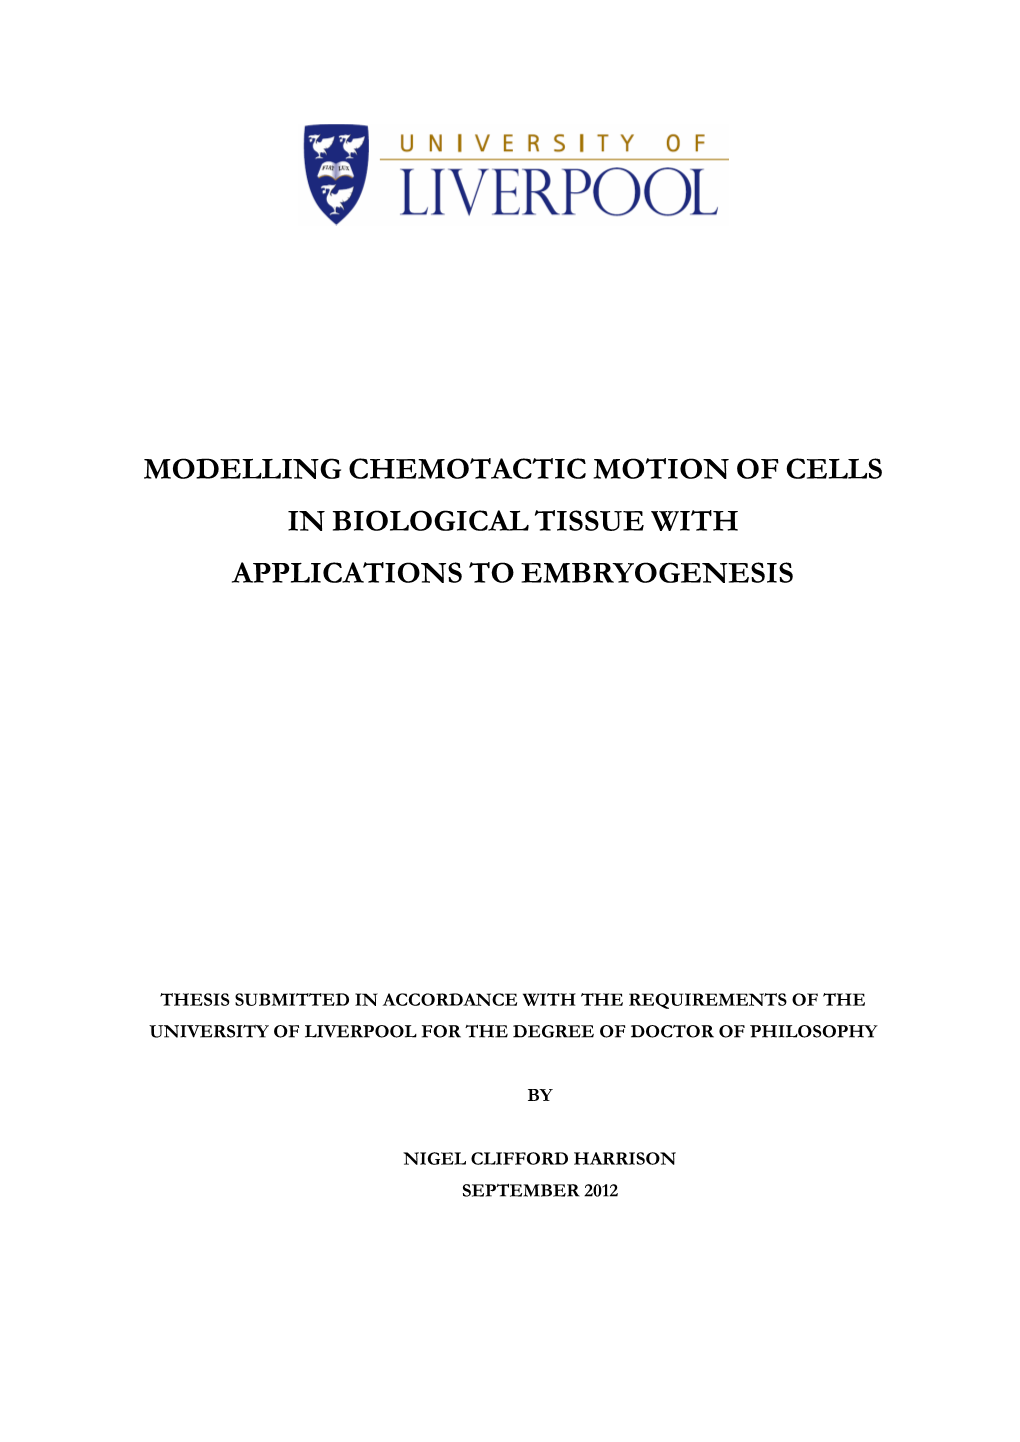 Modelling Chemotactic Motion of Cells in Biological Tissue with Applications to Embryogenesis